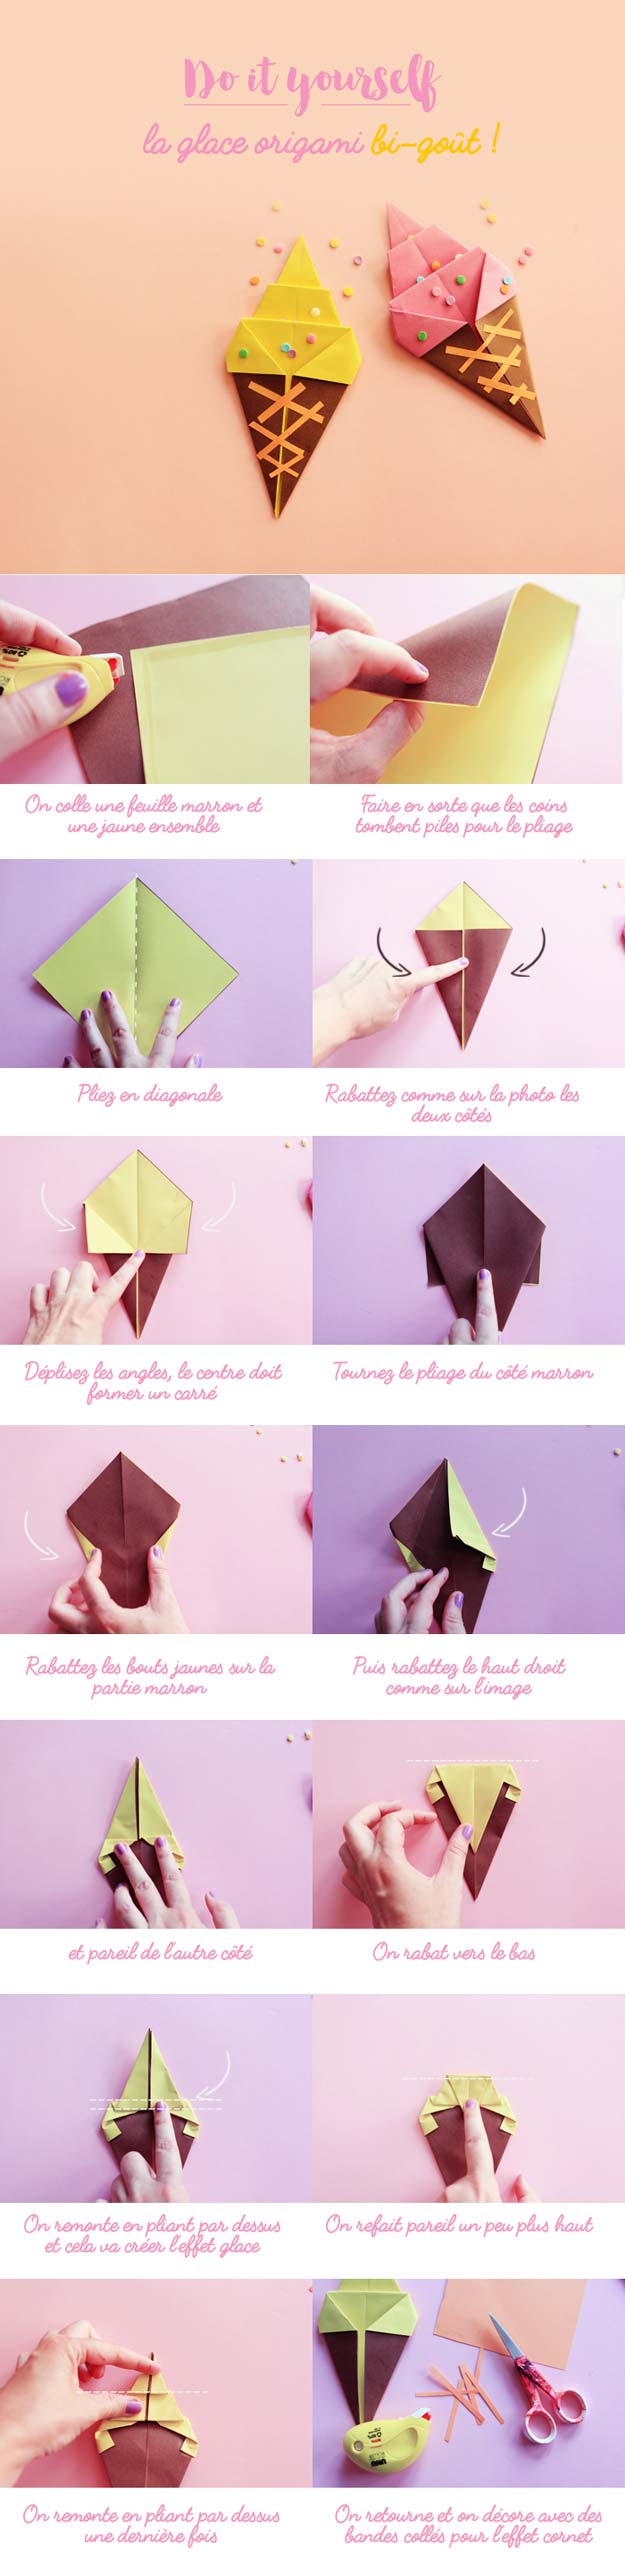 Easy Origami Tutorials - Ice Cream Origami- Easy DIY Origami Tutorial Projects for With Instructions for Flowers, Dog, Gift Box, Star, Owl, Buttlerfly, Heart and Bookmark, Animals - Fun Paper Crafts for Teens, Kids and Adults #origami #crafts